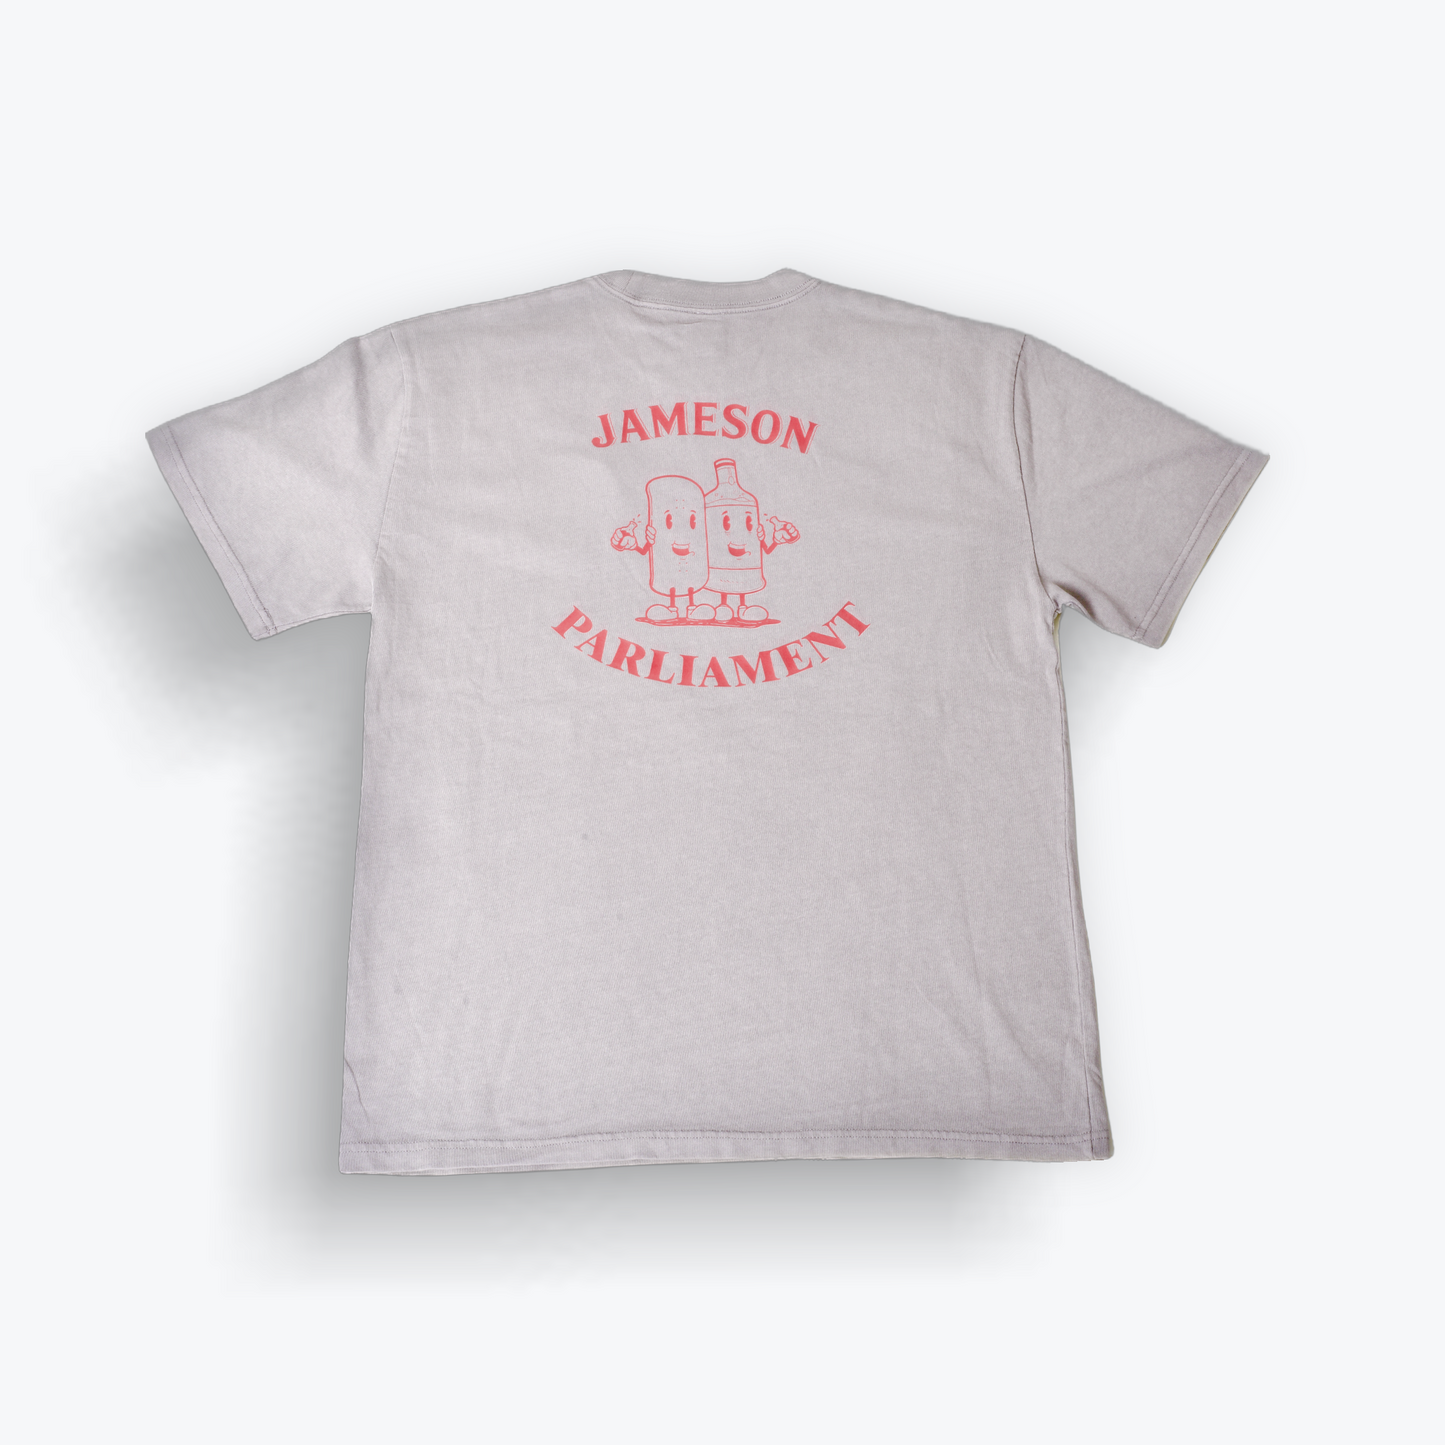 Jameson X Parliament - Embroidered Tee - Grey